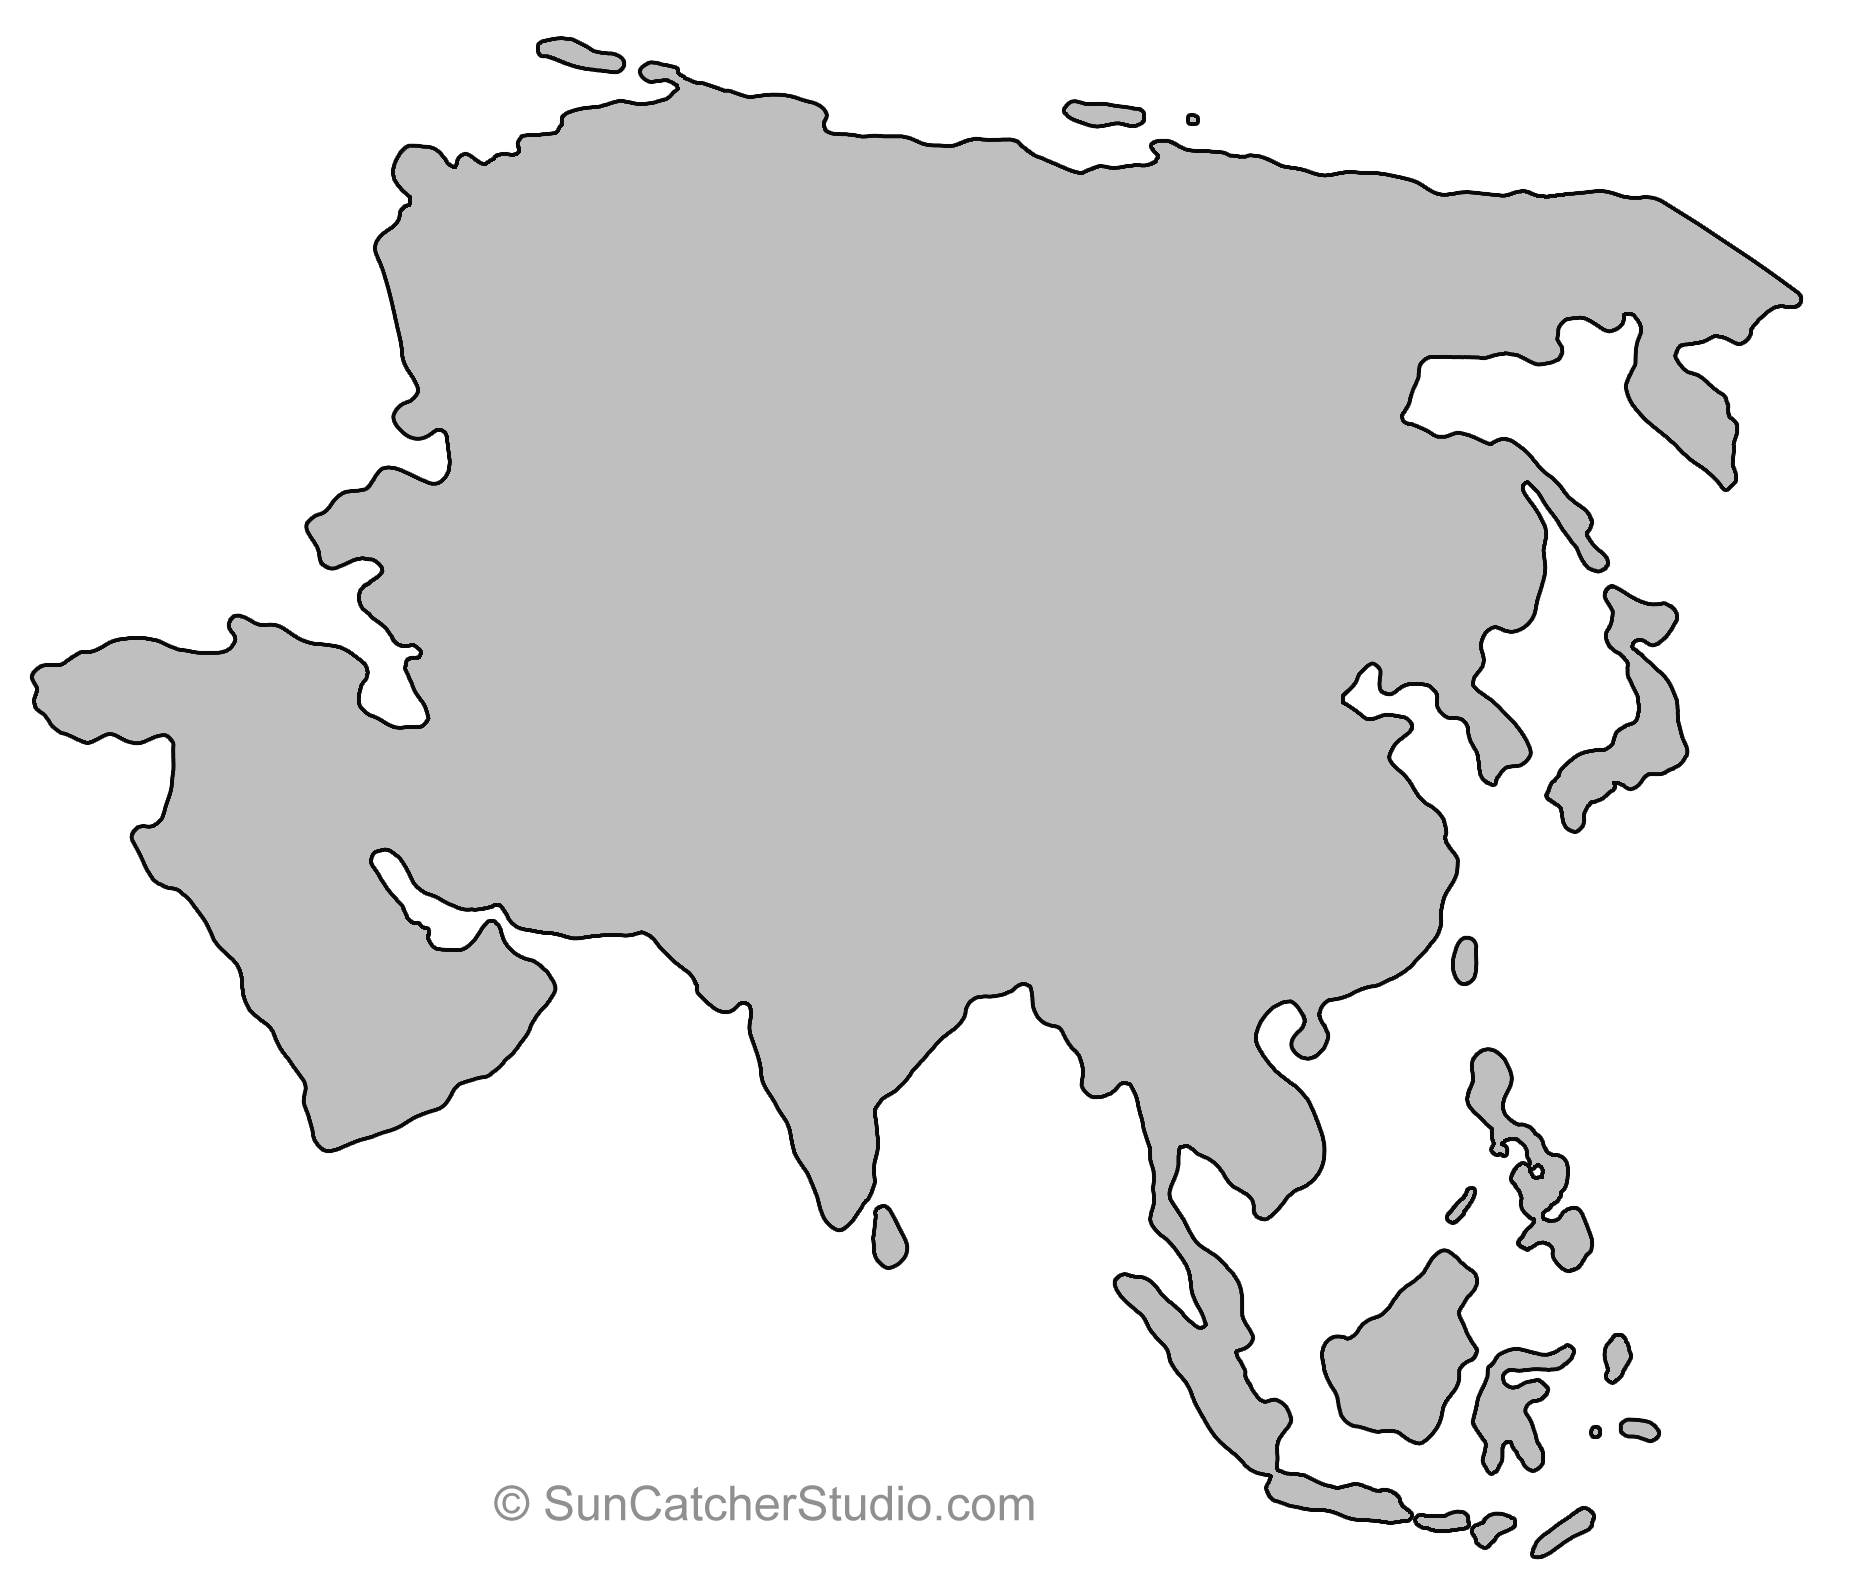 Asia Continent Map PNG Images Transparent Background | PNG Play